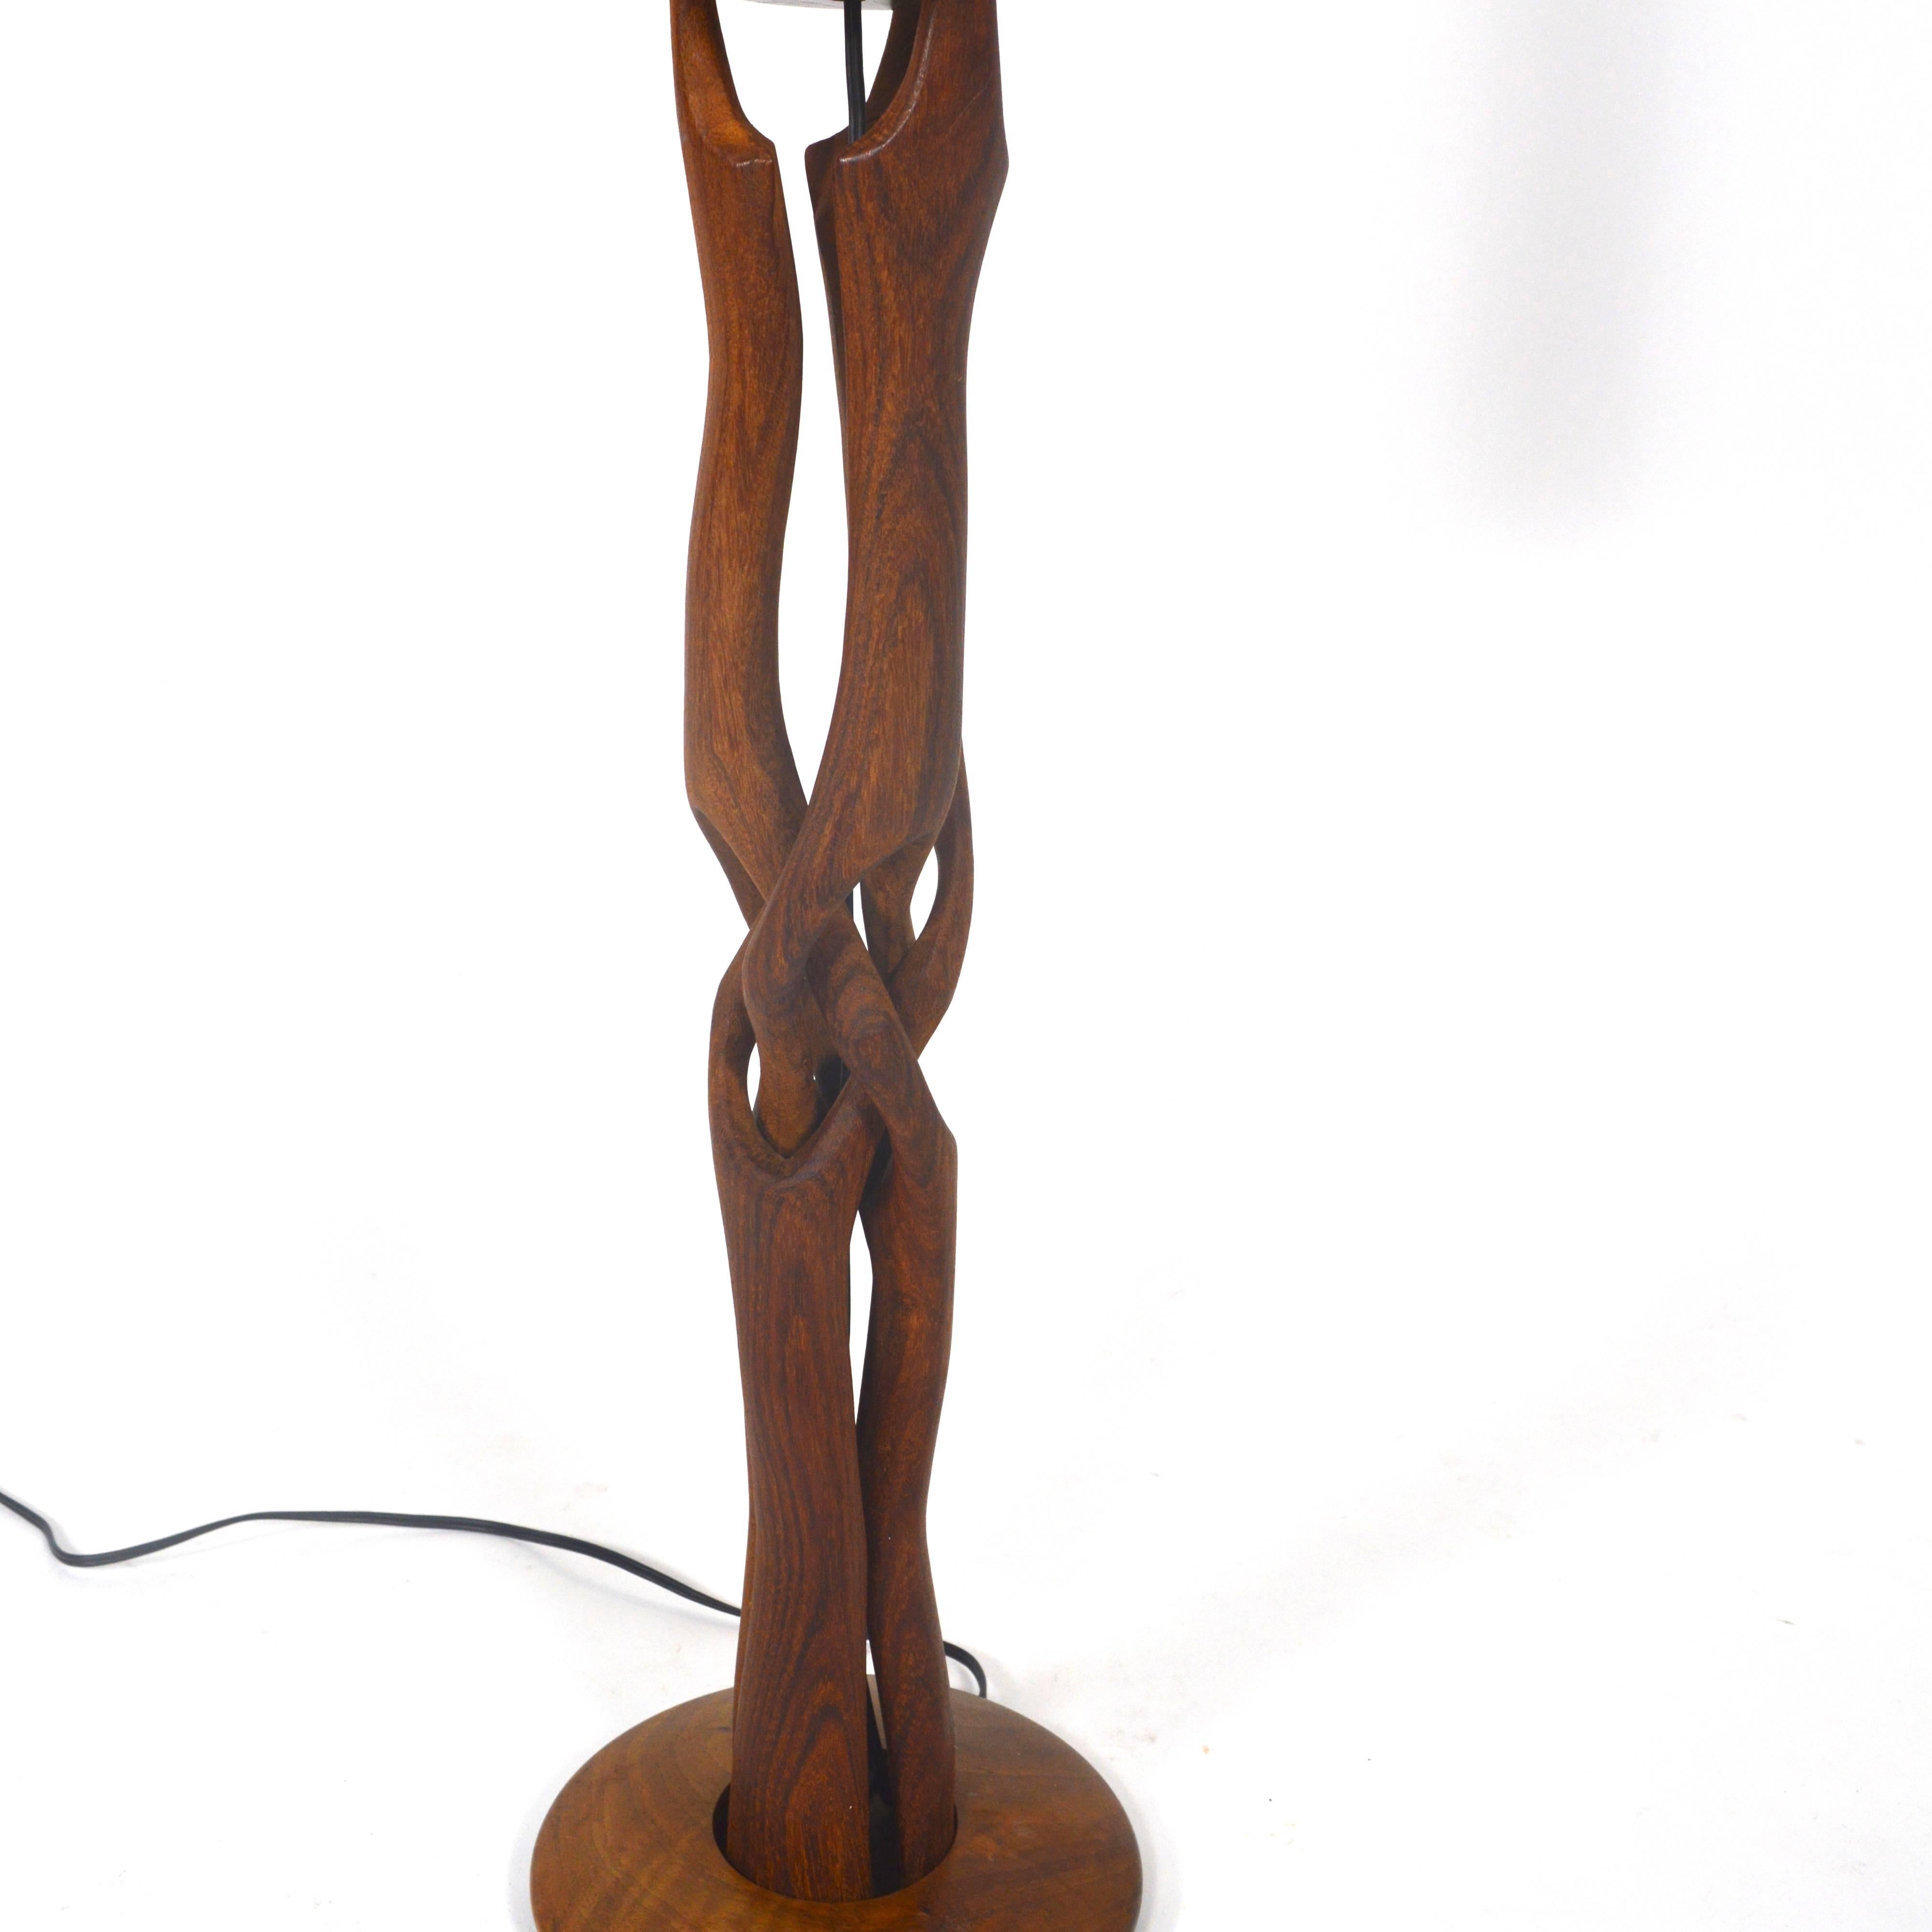 Very rare one-of Scandinavian design table lamp. The wood is hand-carved from one piece of solid Teak. It's organic shapes are made to look like tree roots.
This lamp is a true work of art. An eye catcher that will make people talk about.
In